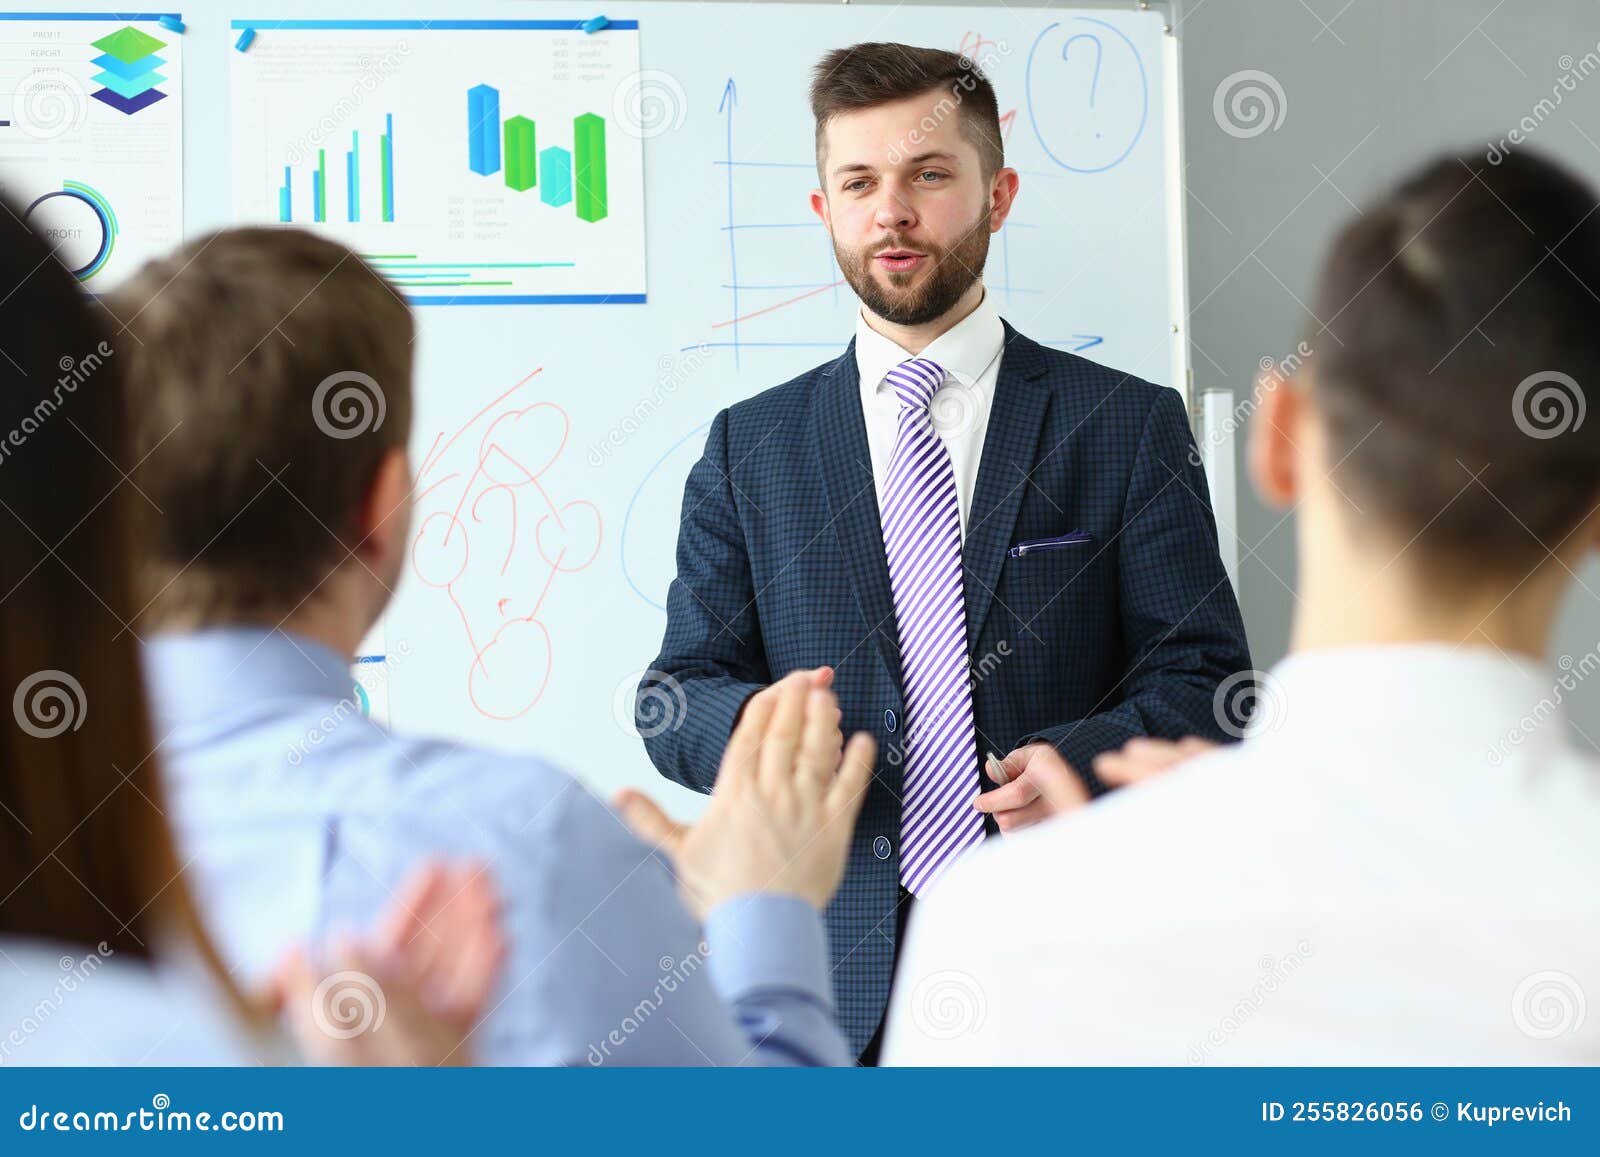 Male Business Coach Speaker in Suit Makes Presentation Stock Photo ...